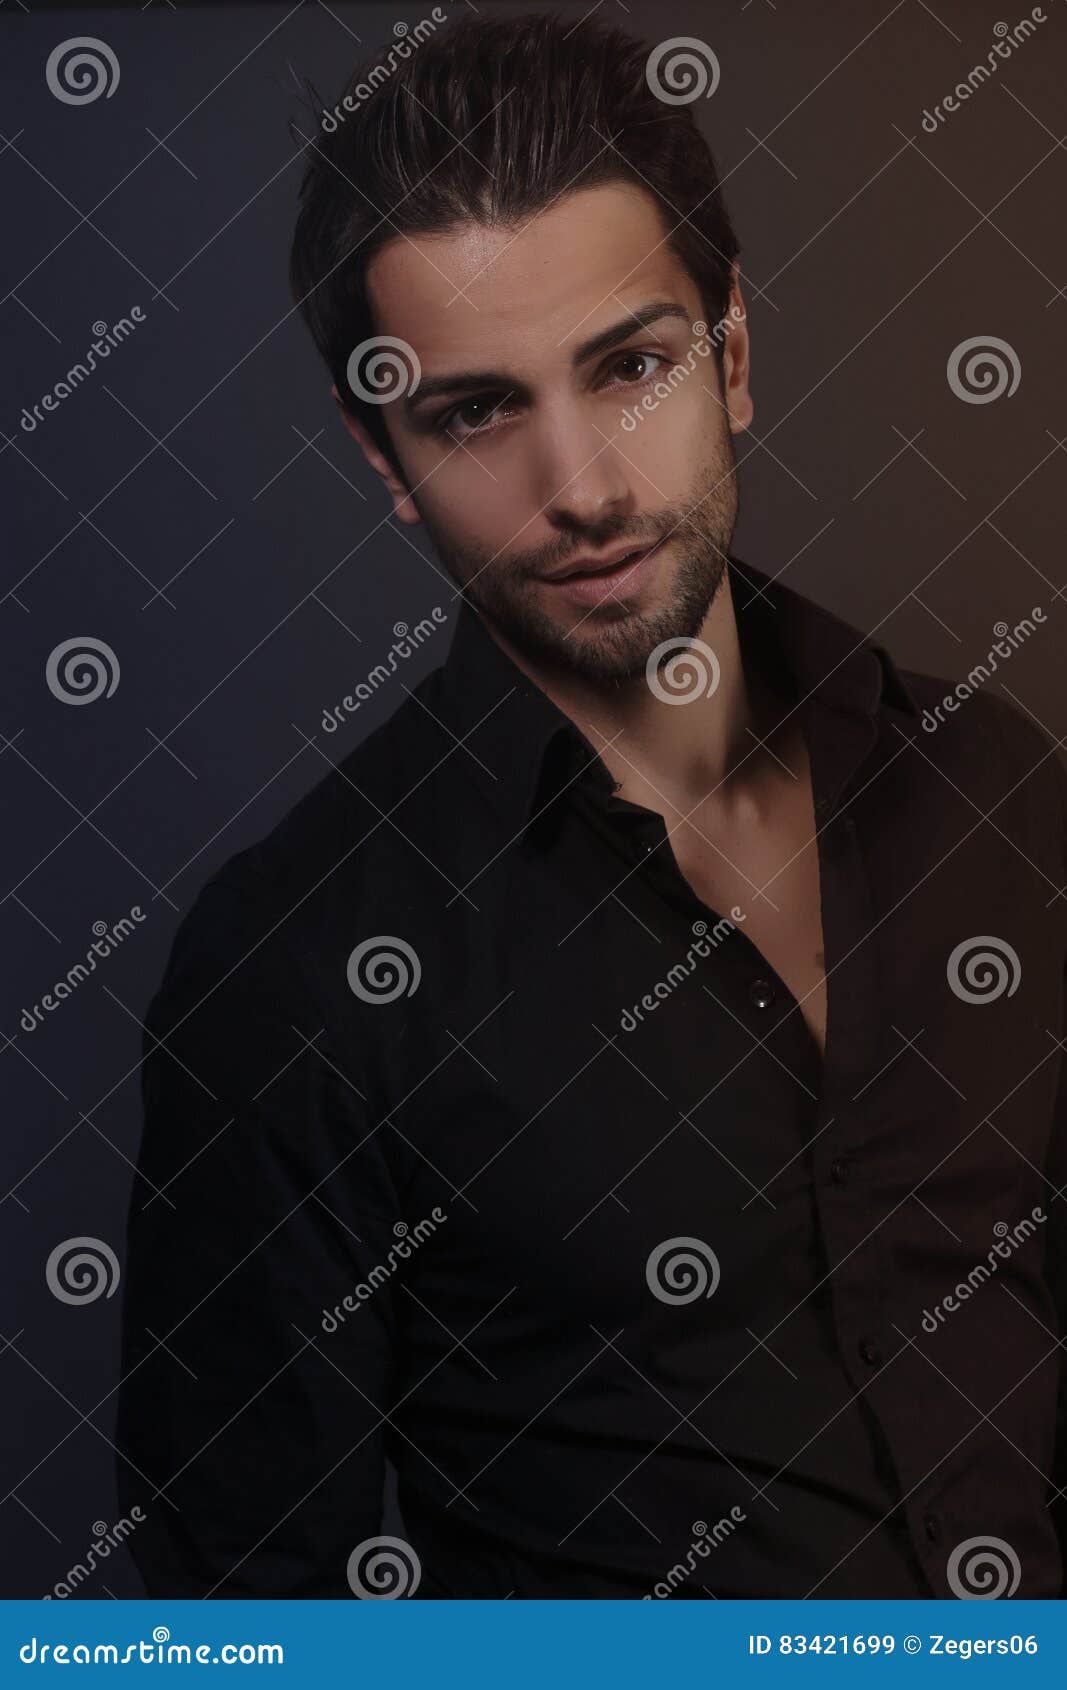 Fashion Portrait of Young Man in Black Shirt Stock Image - Image of ...